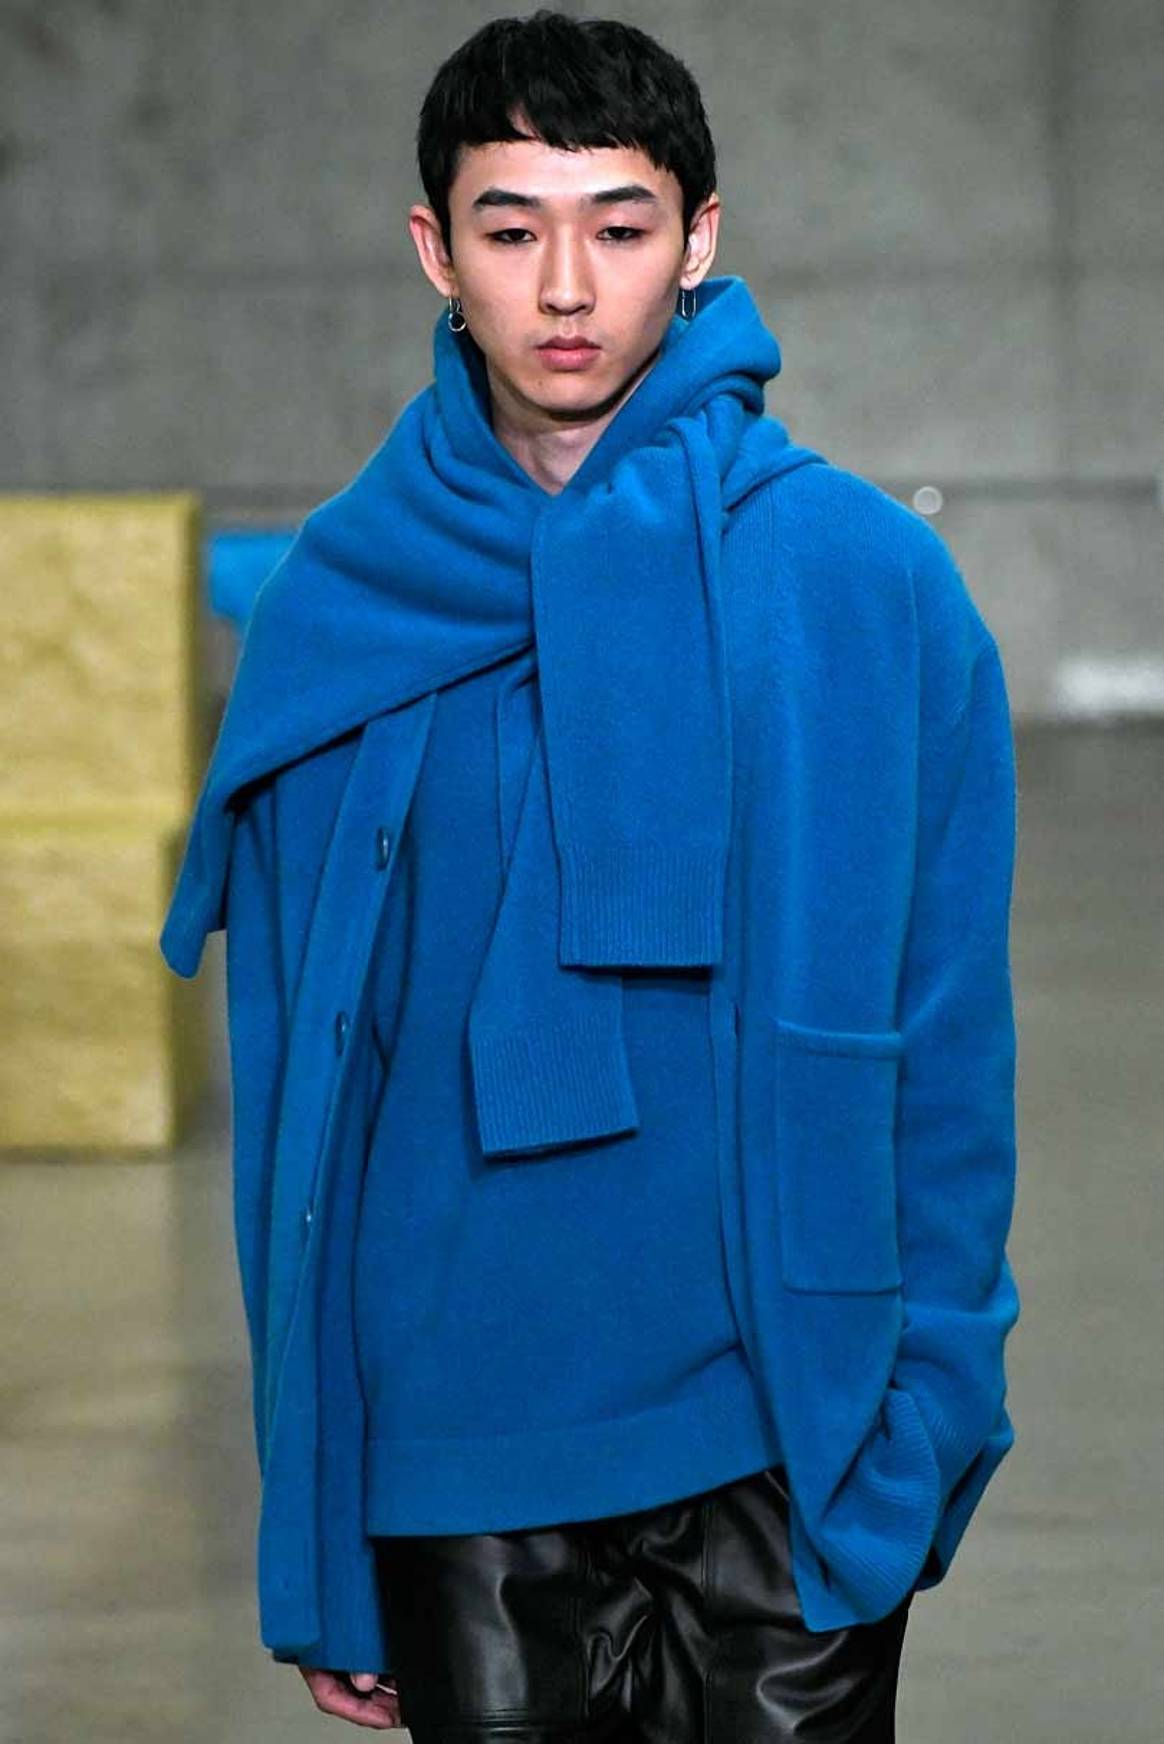 Spotted on the Catwalk: Key Colors at New York Fashion Week AW19